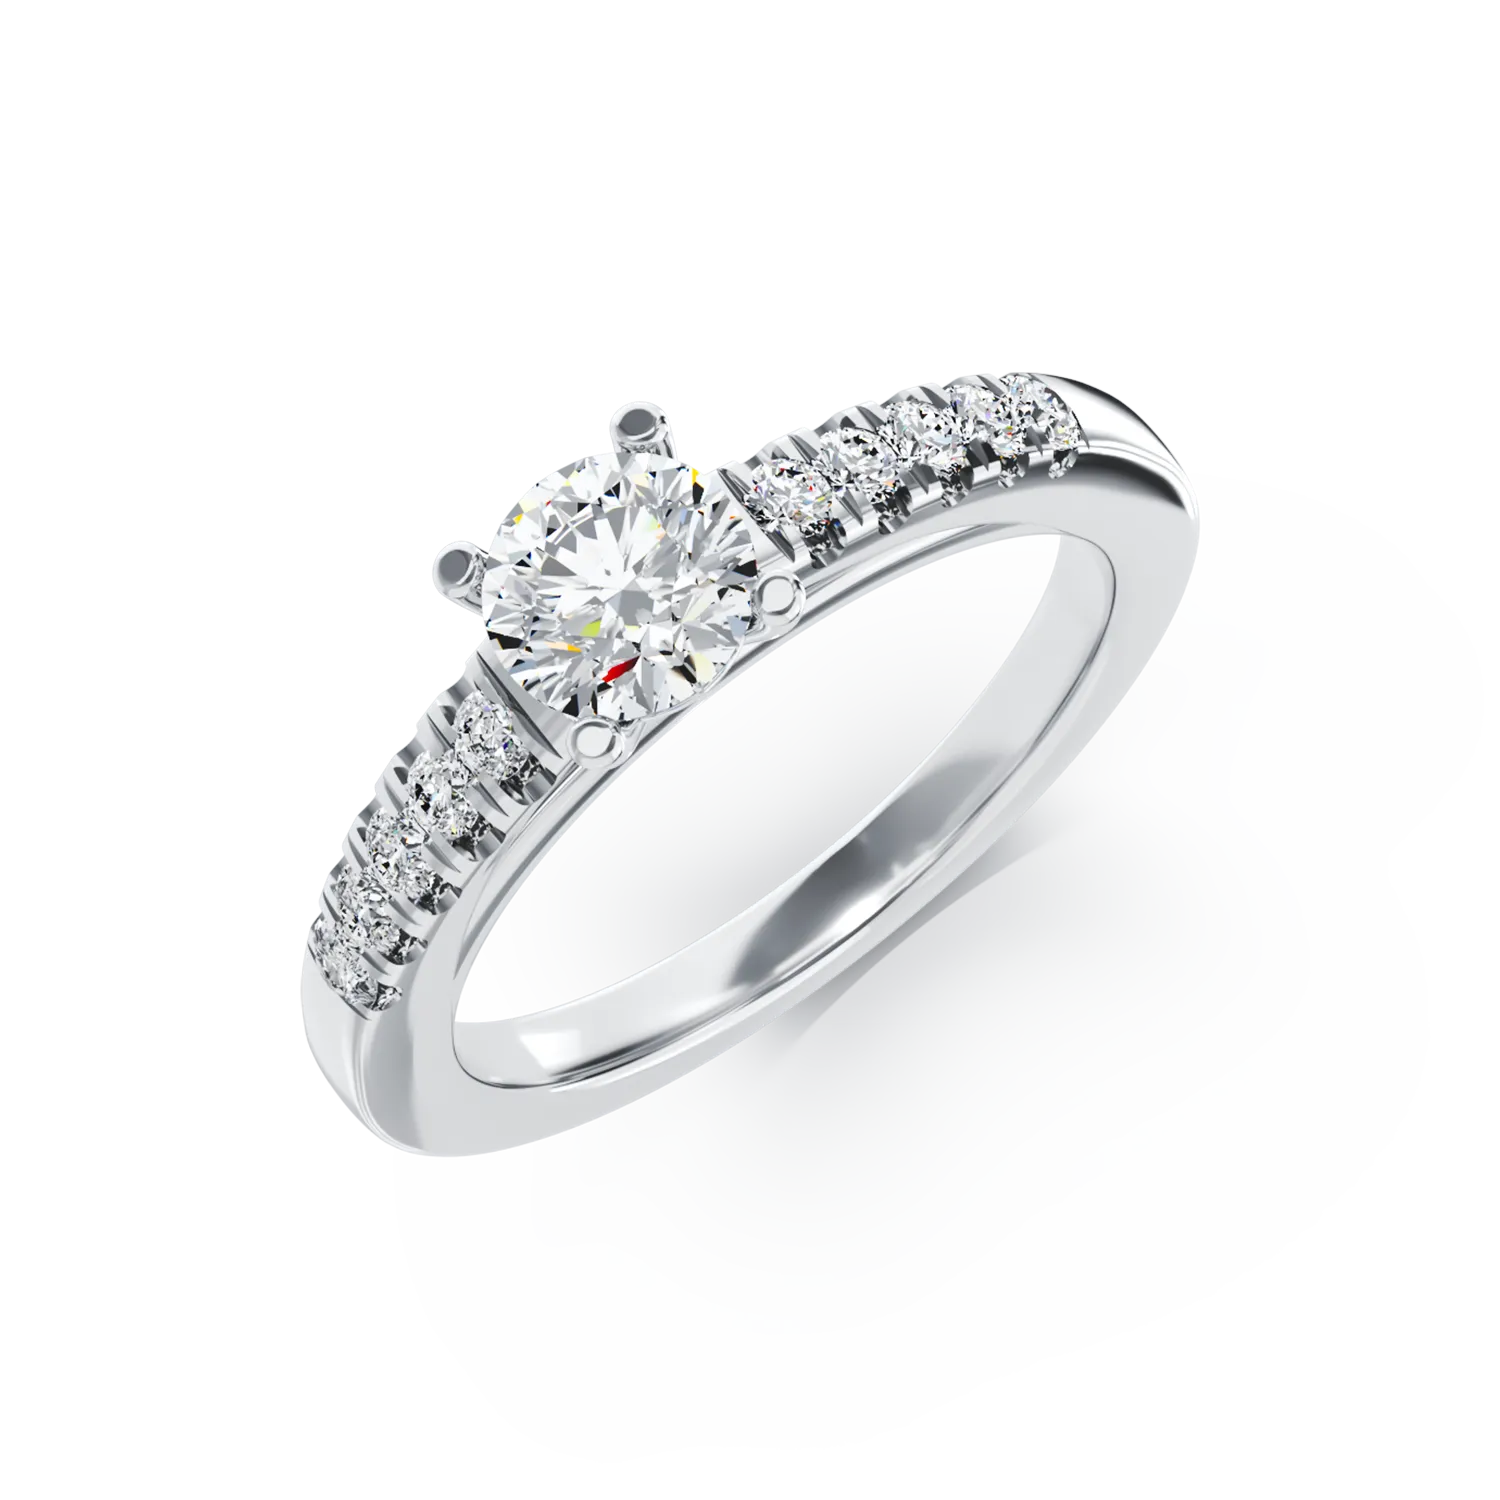 18K white gold engagement ring with 0.41ct diamond and 0.14ct diamonds